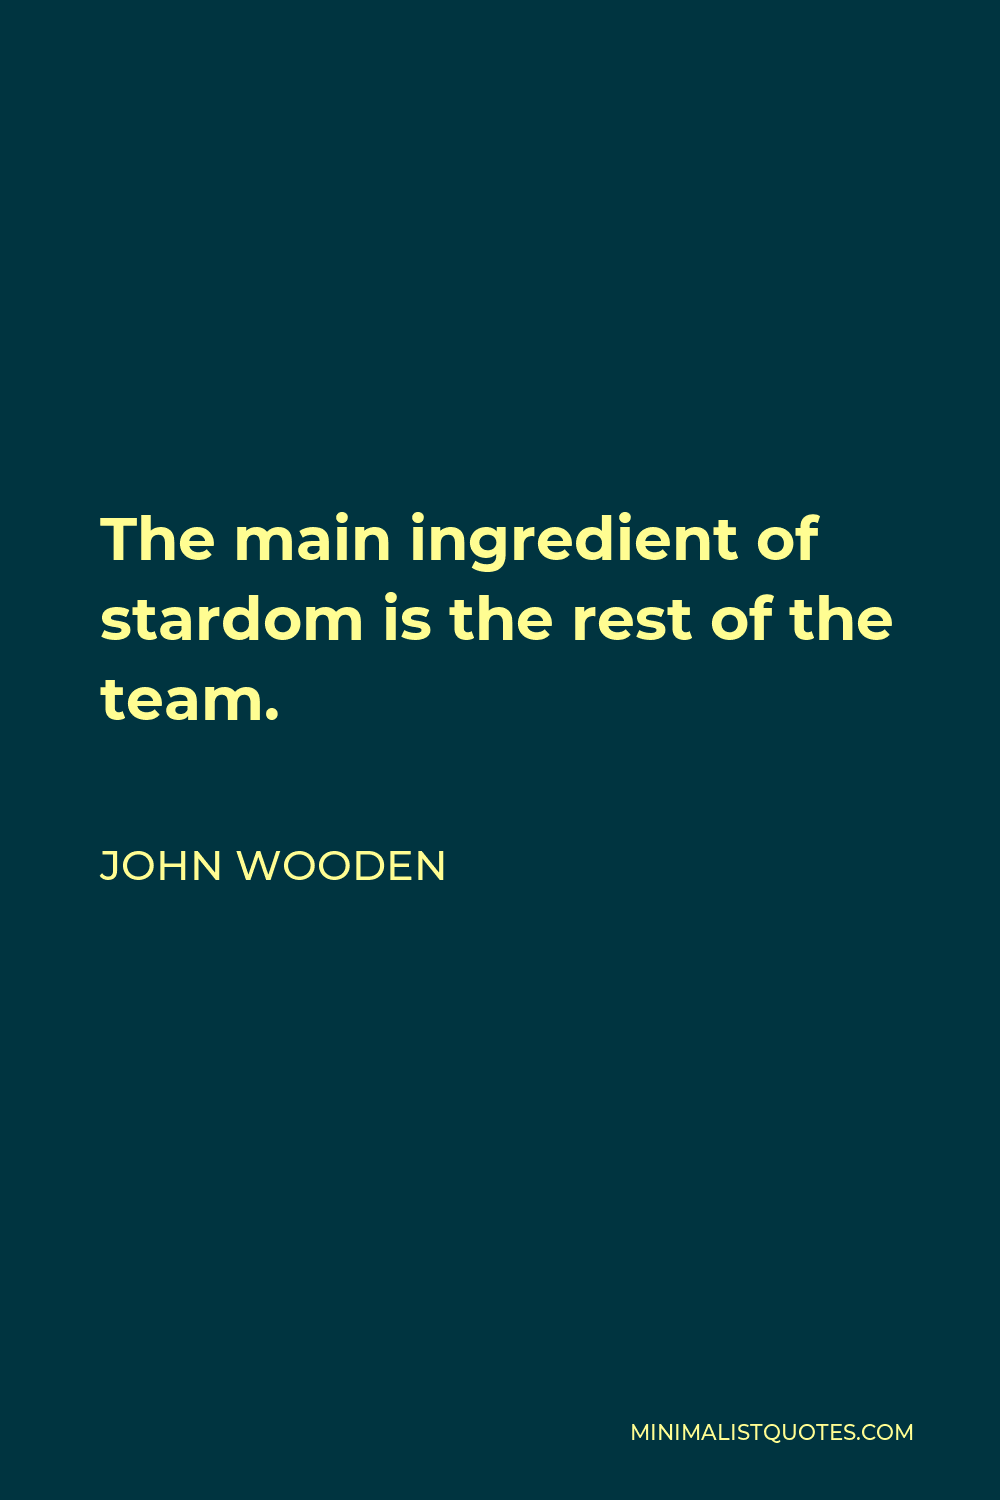 John Wooden Quote: The main ingredient of stardom is the rest of the team.